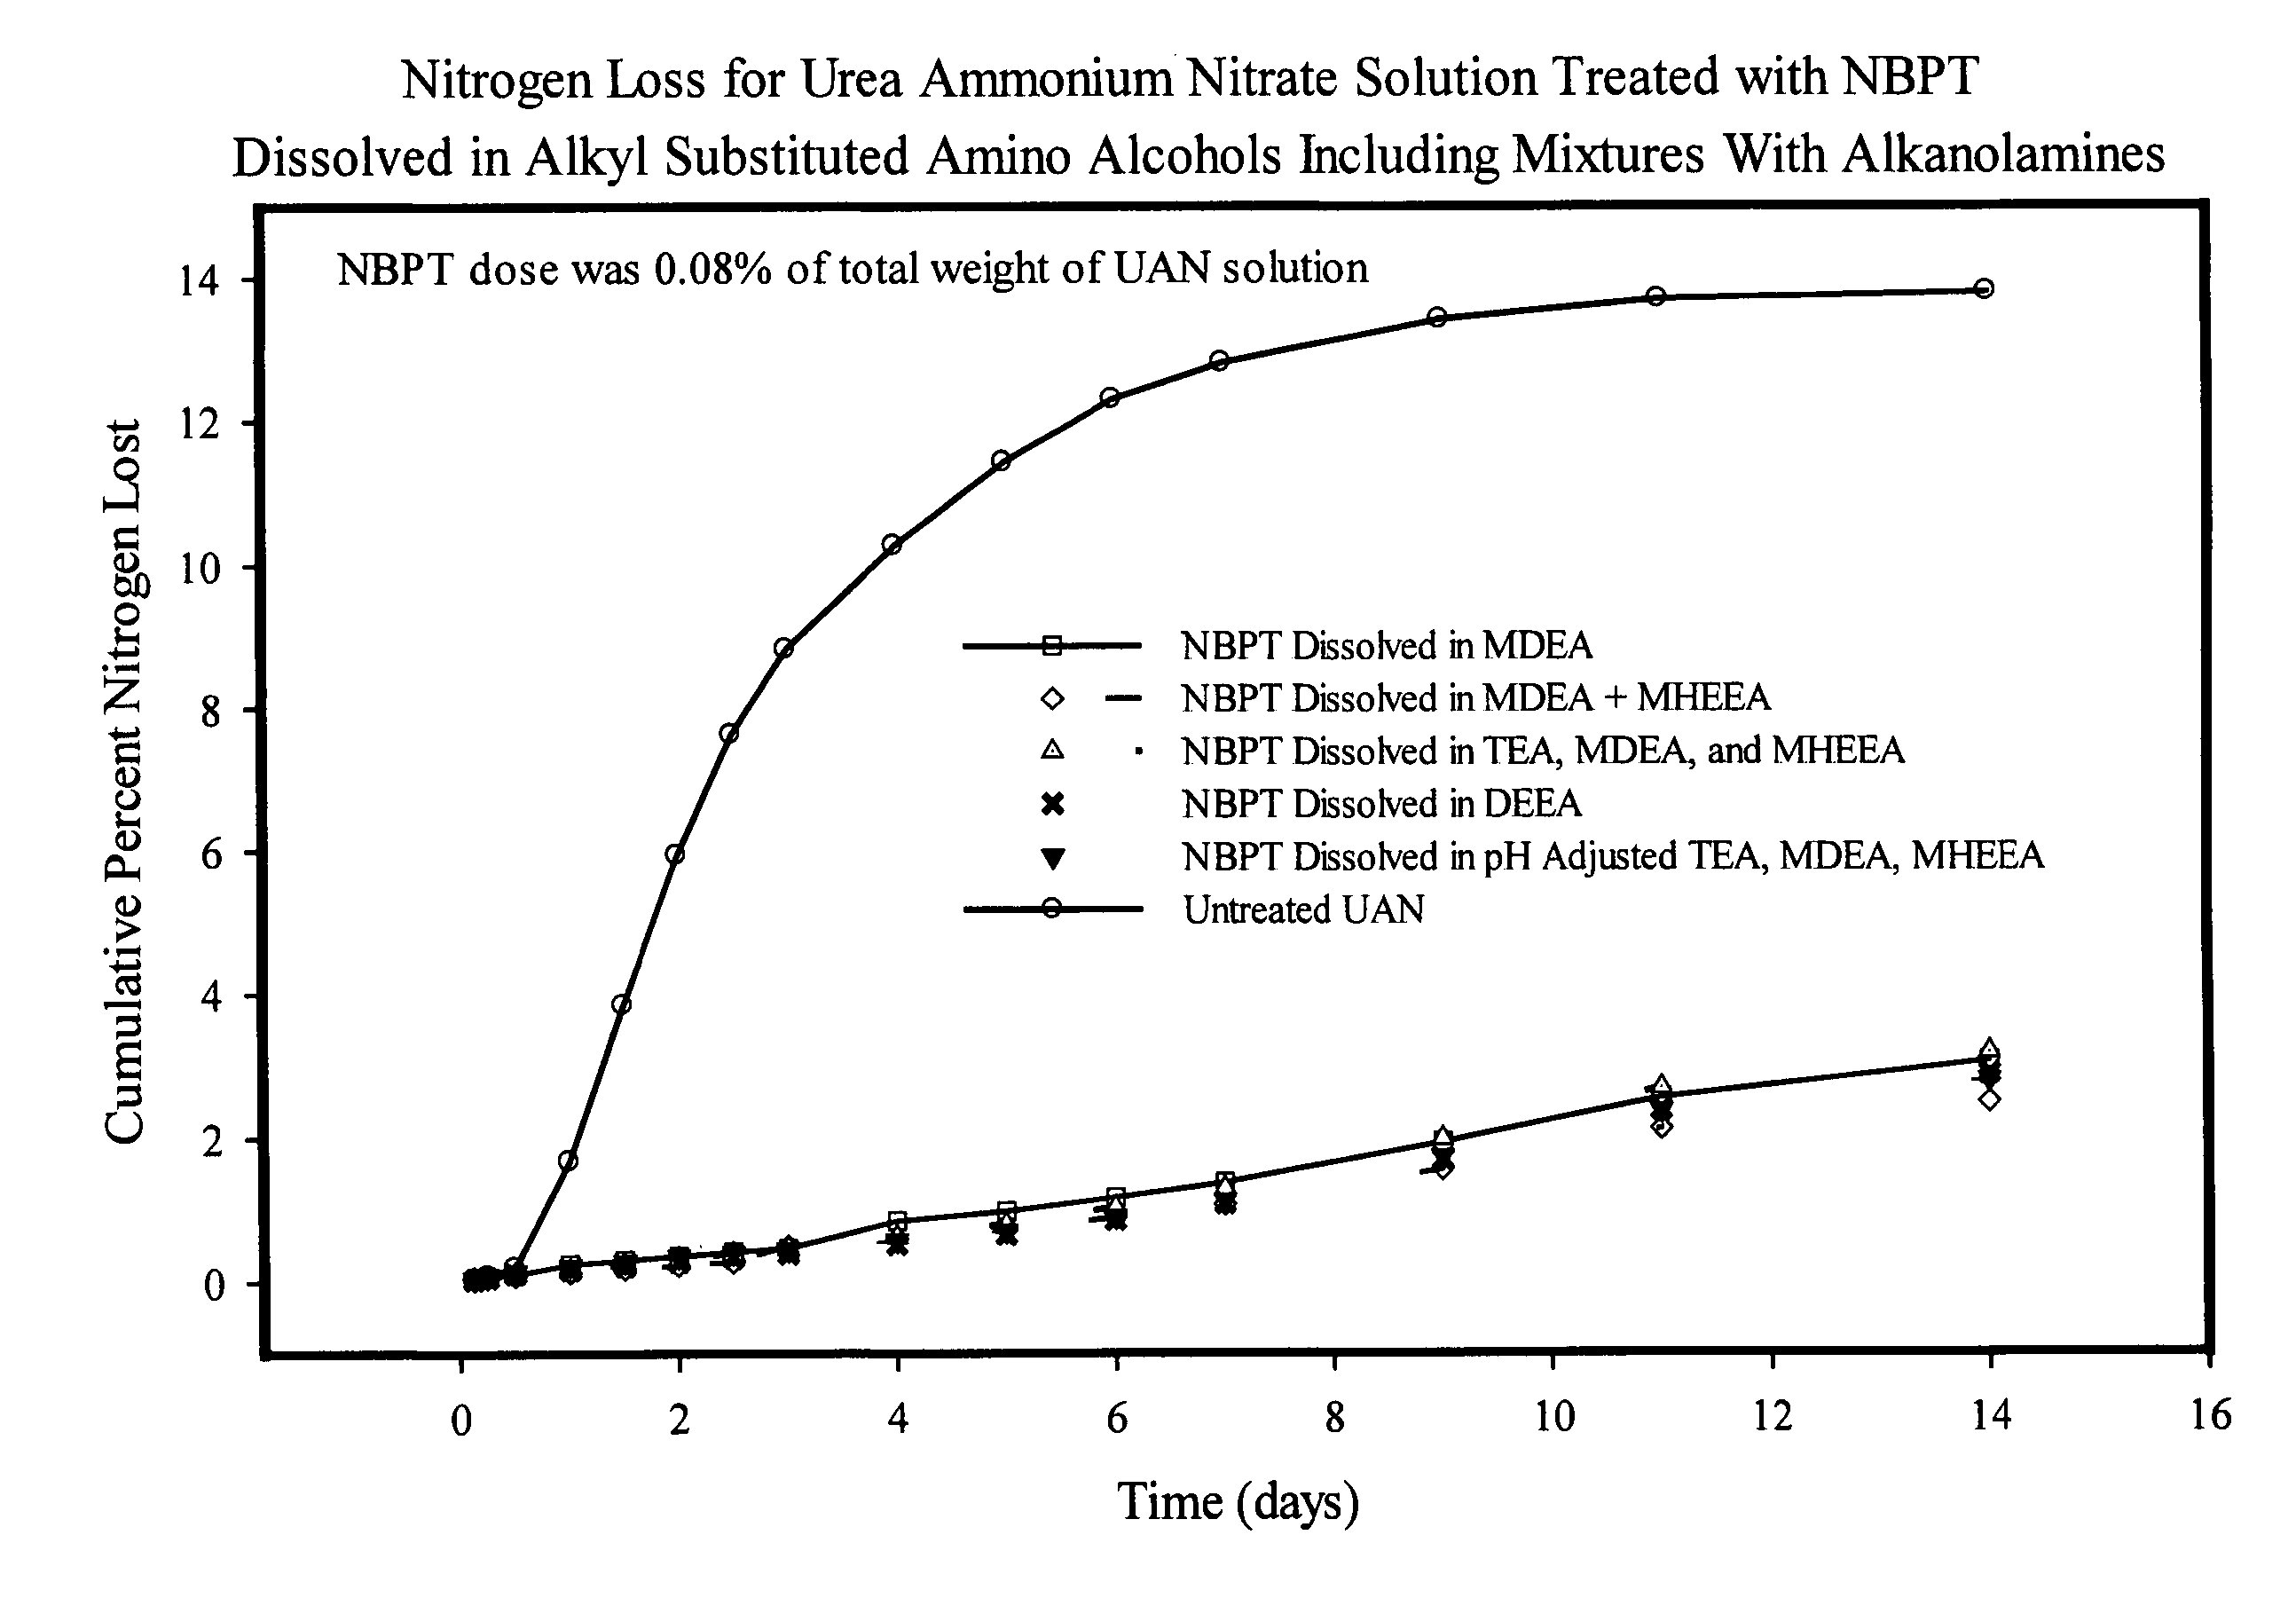 NBPT solution for preparing urease inhibited urea fertilizers prepared from N-alkyl; N, N-alkyl; and N-alkyl-N-alkoxy amino alcohols